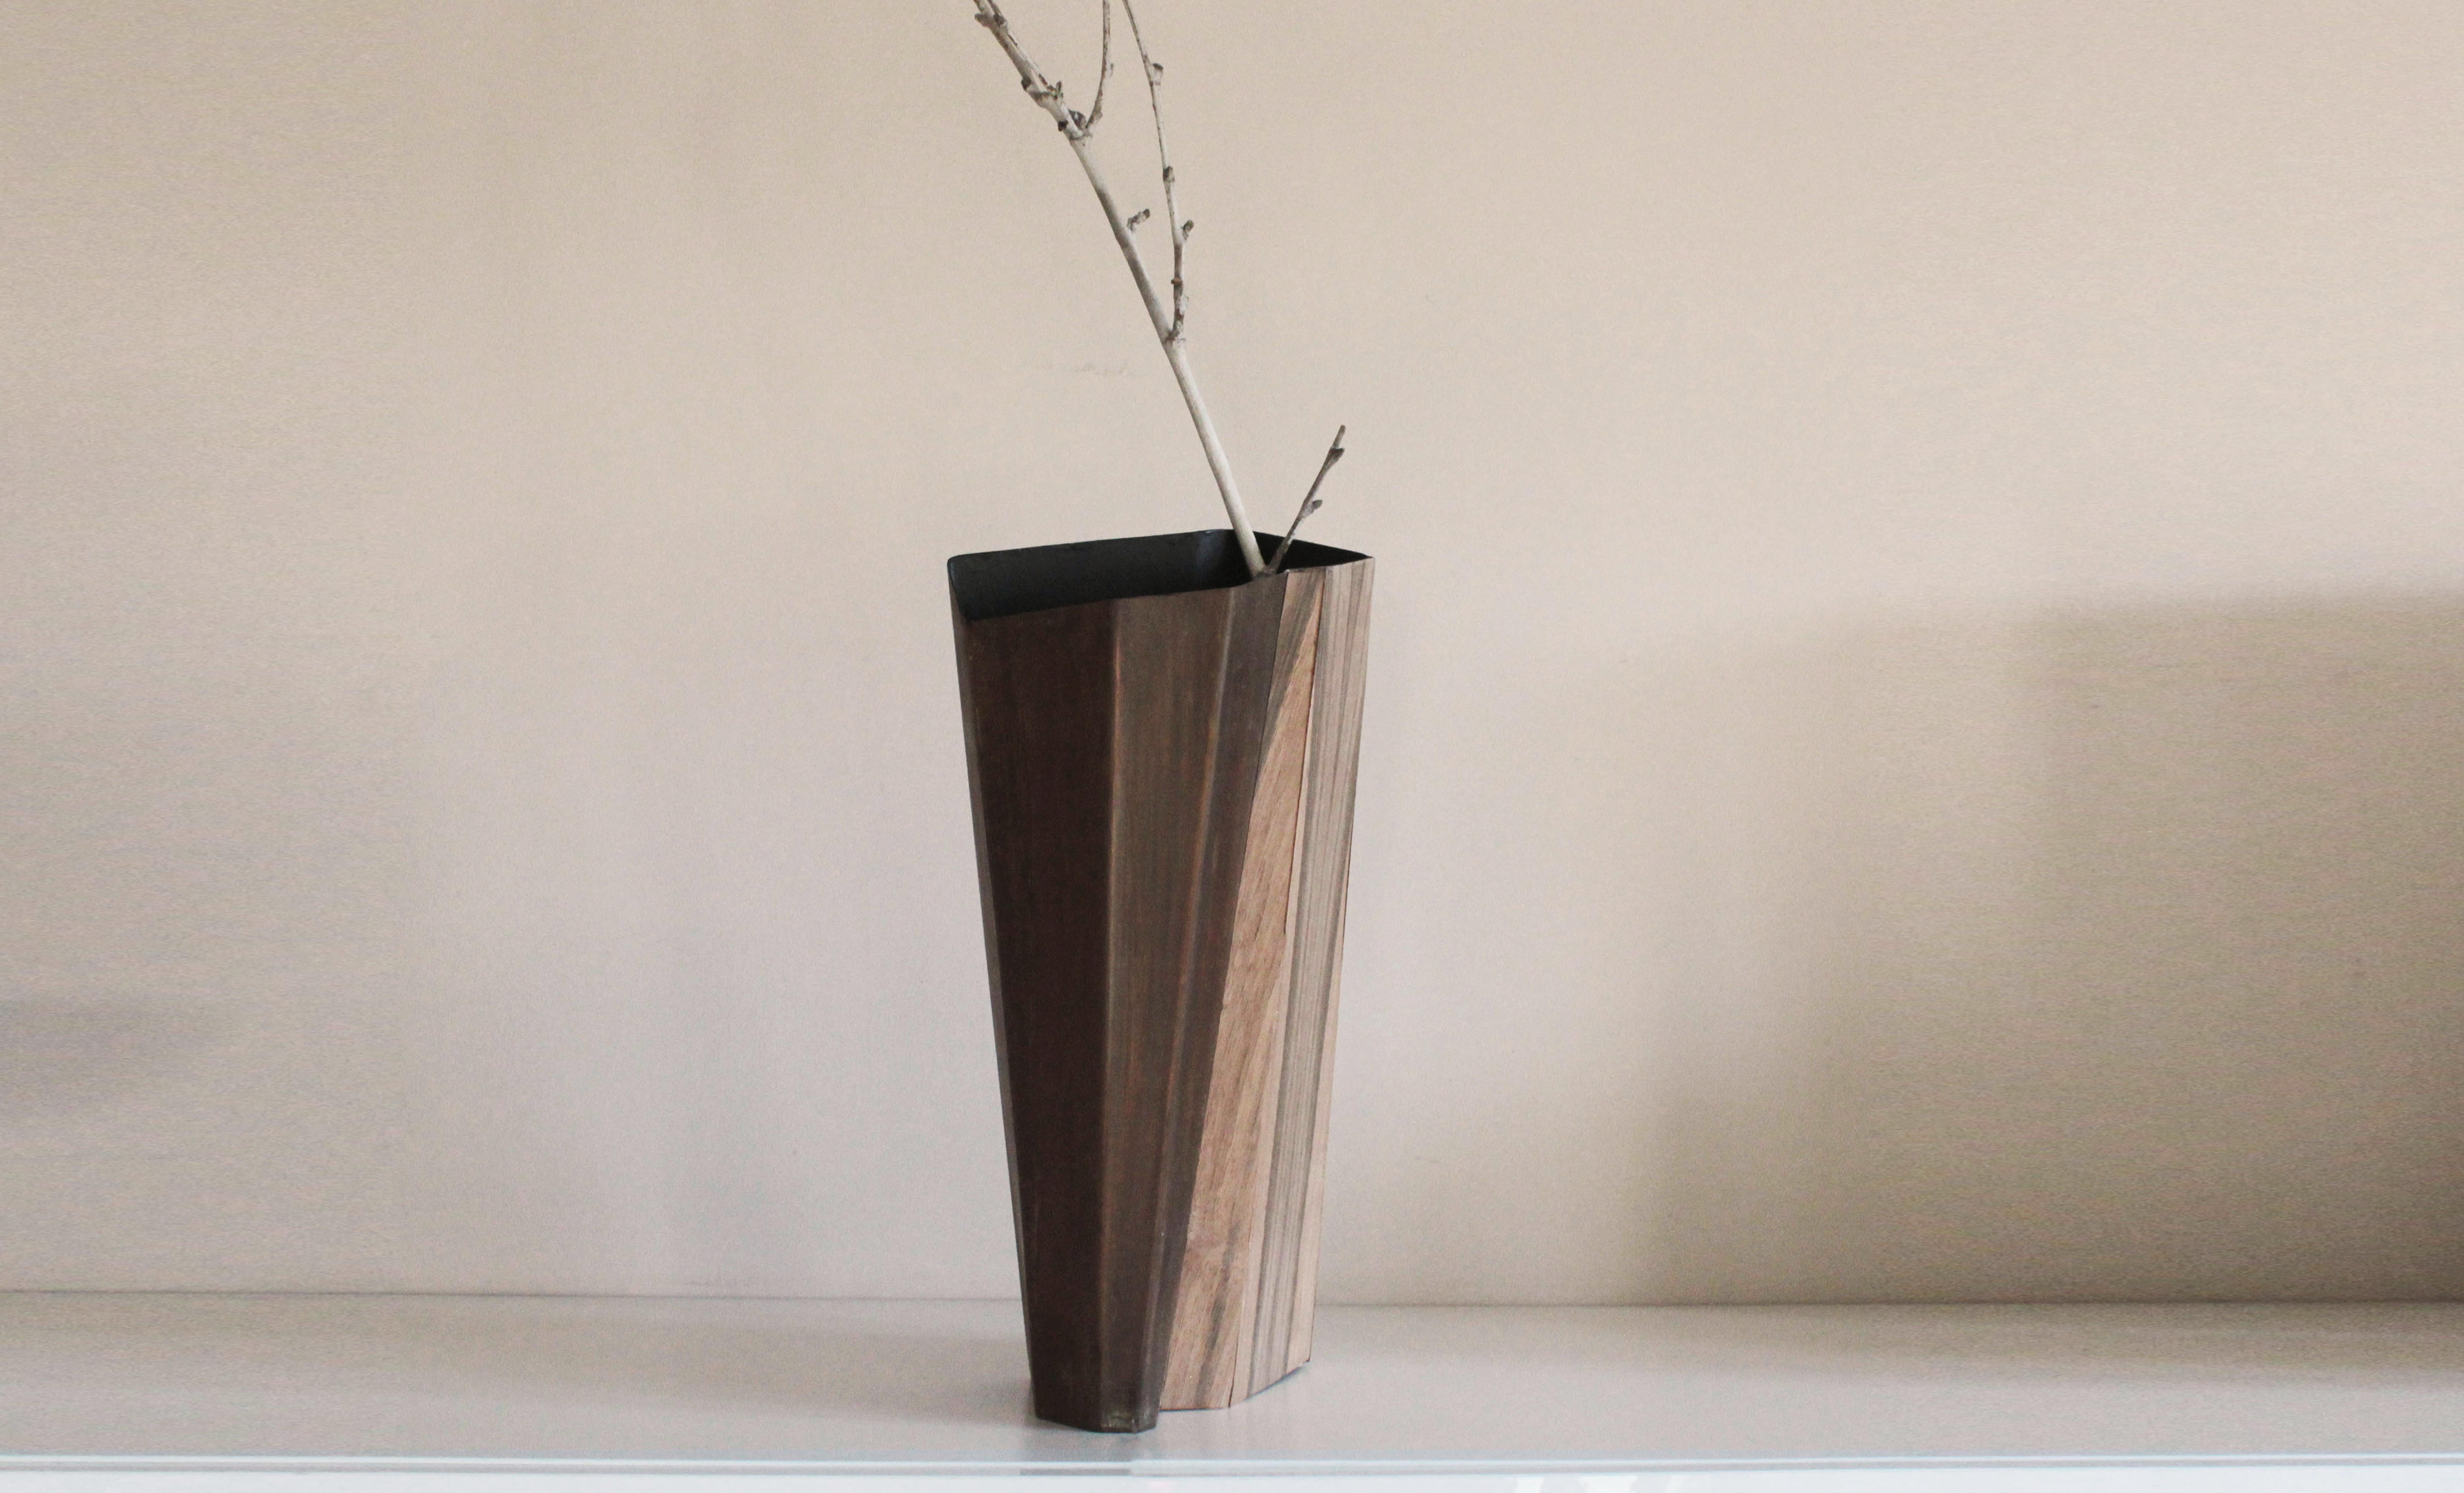 This vase, Anphora series, is part of a collection dedicated to nature and icebergs. It’s a unique piece, made by excellent Italian artisans. Raoul Gilioli, artist and designer, has created a series of vases using natural materials, using